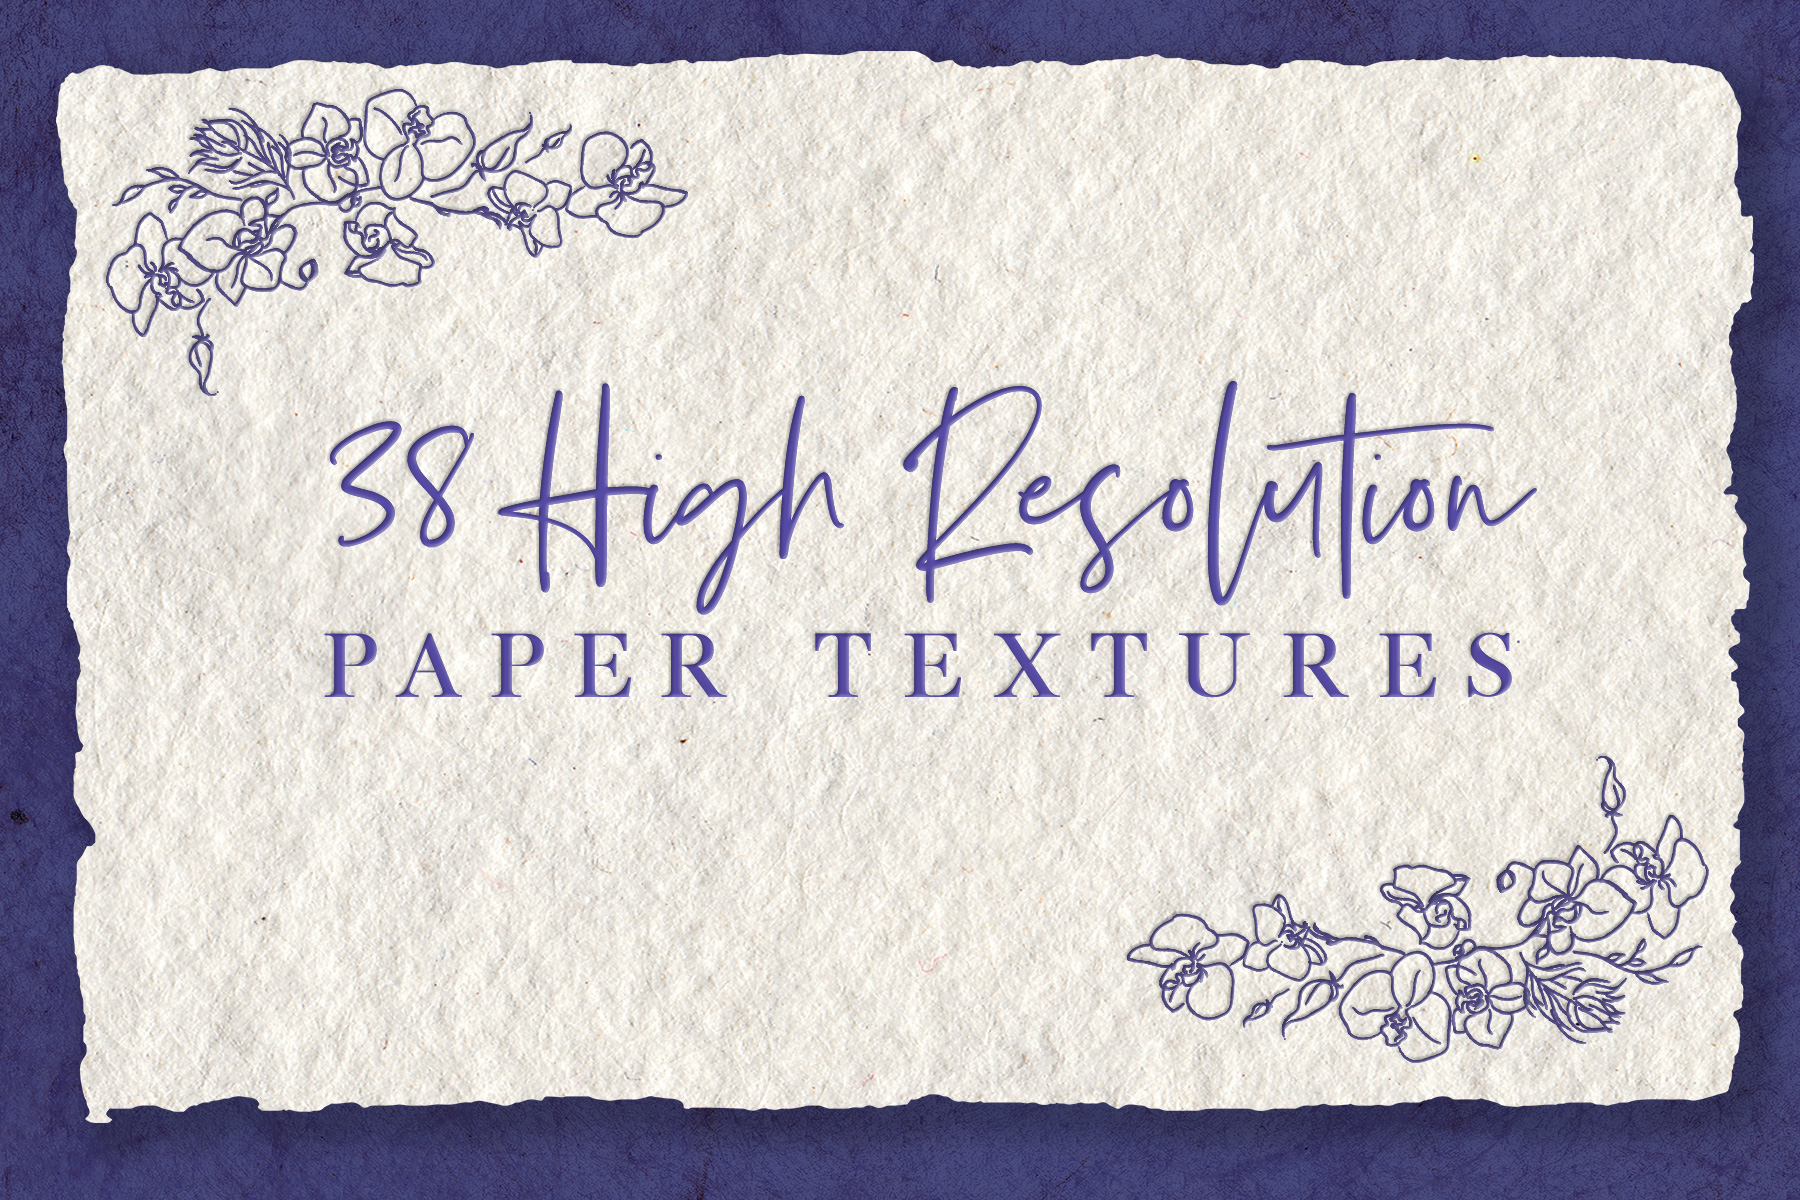 38 High Resolution Paper Textures for Your Creative Designs